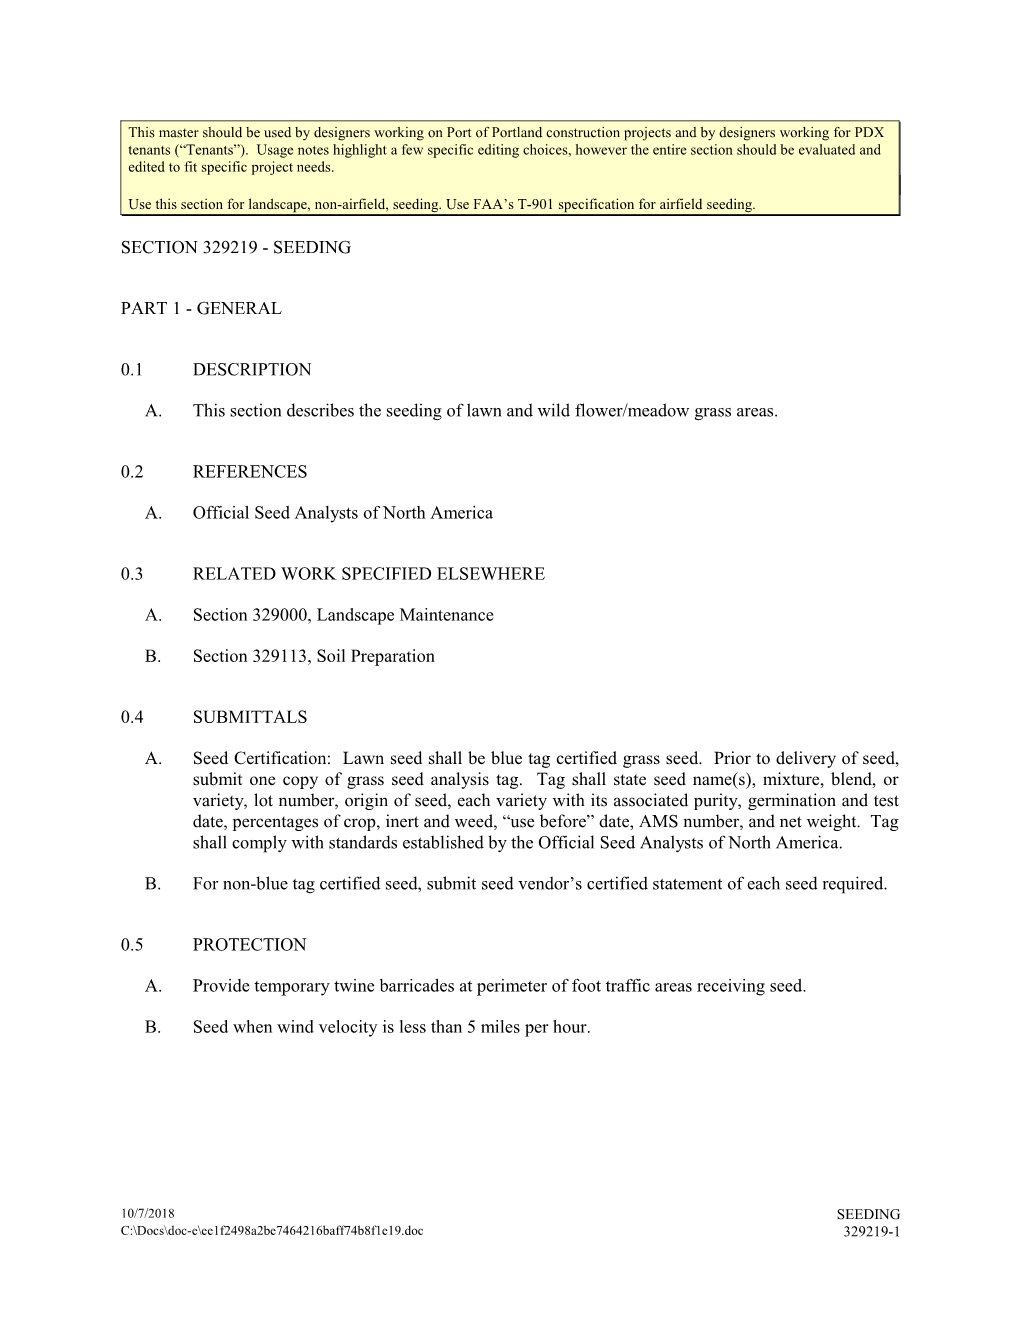 SECTION 329219 - SEEDING (Non-Airfield Landscaping)